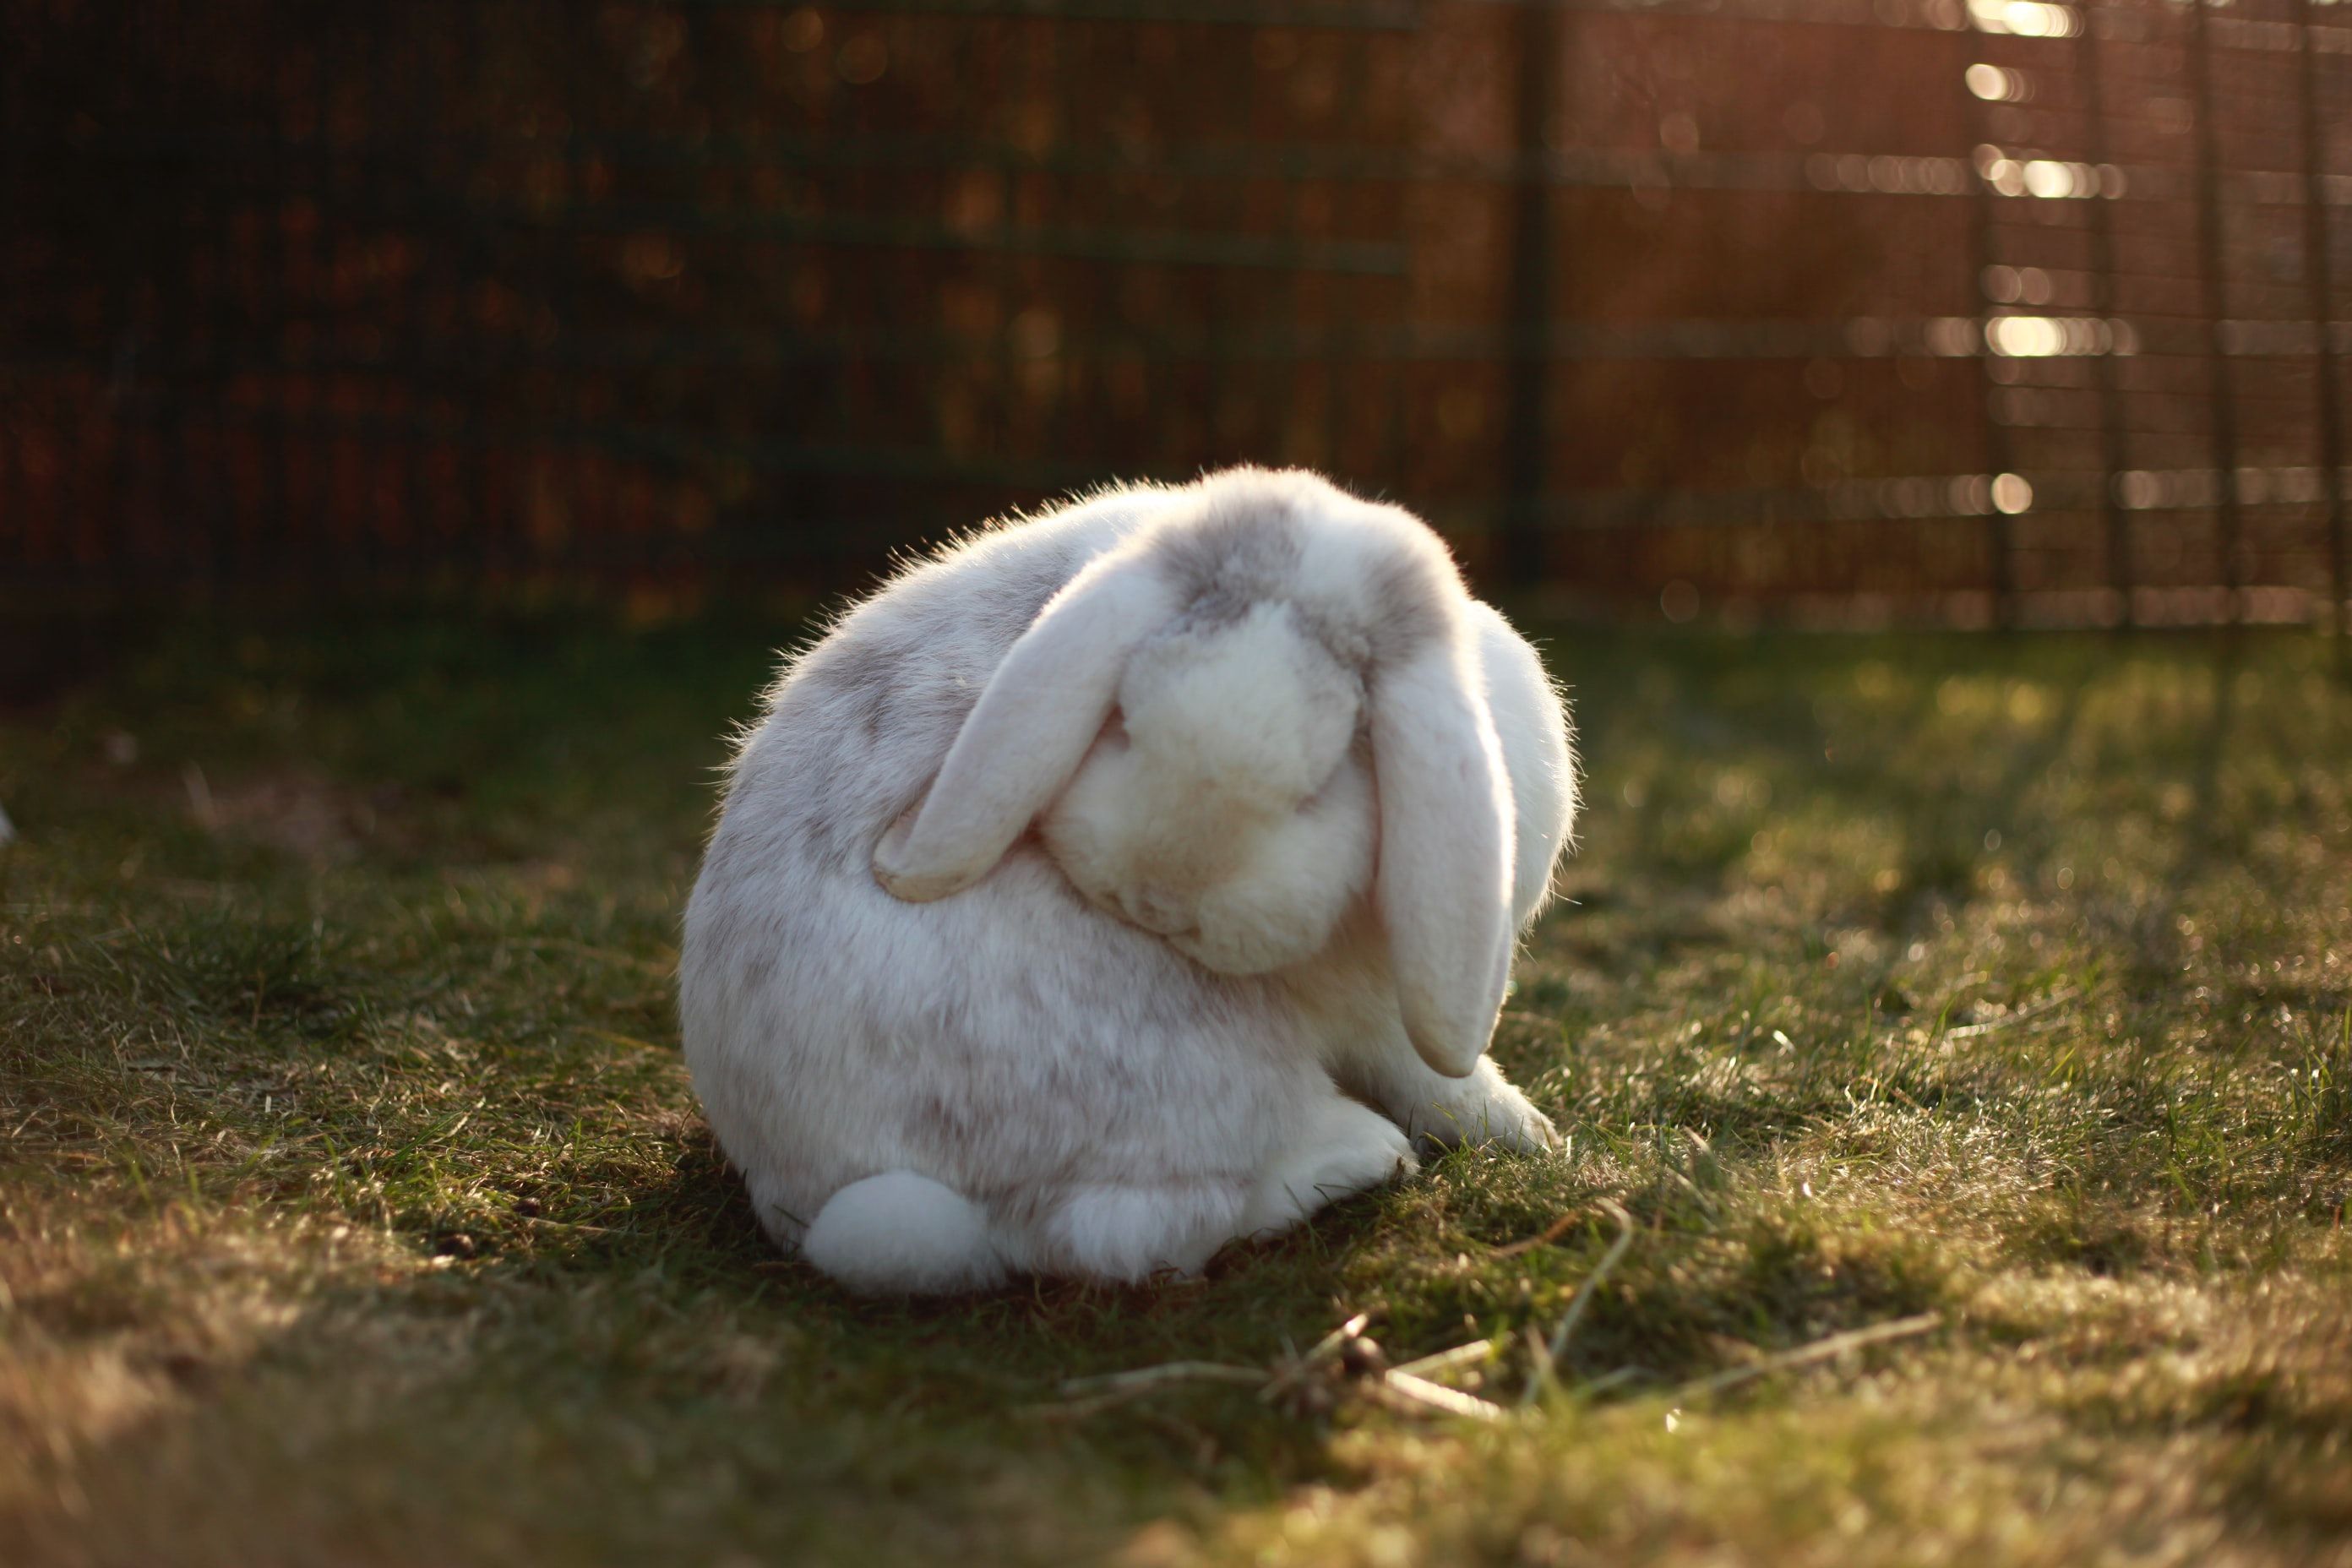 a gray and white bunny in a grassy field